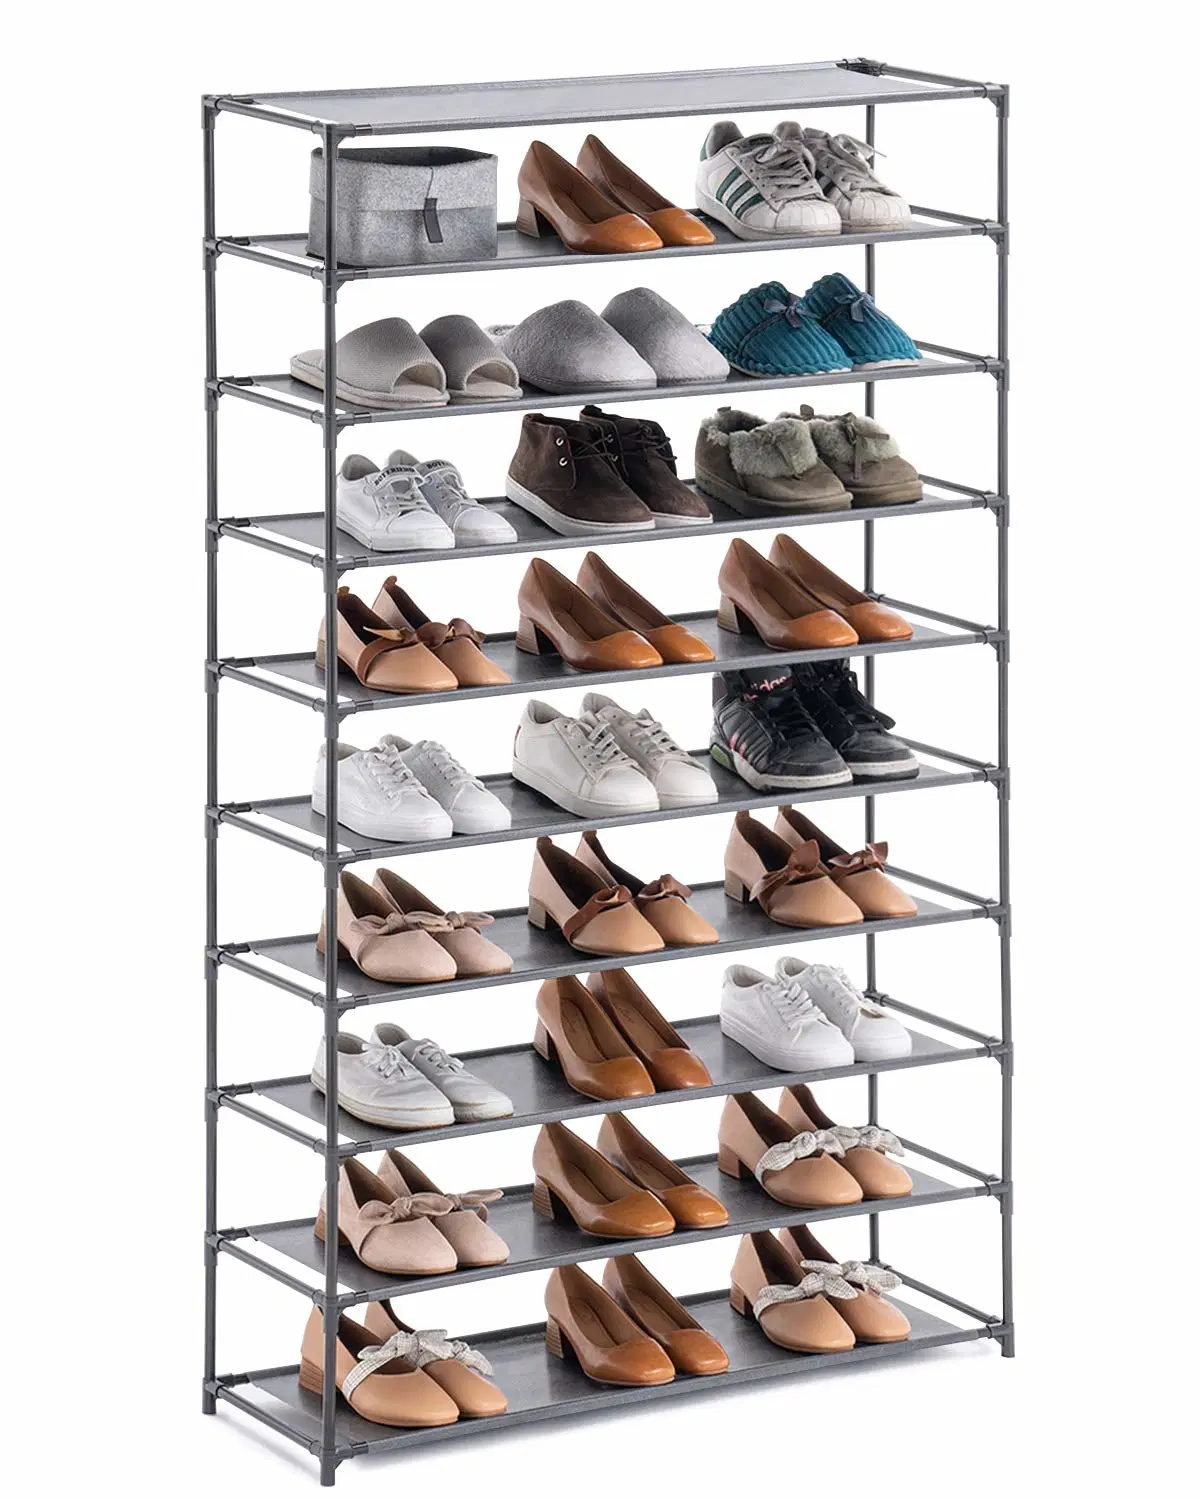 8-Tier Shoe Rack, Stackable Shoe Storage Organizer, Holds 52-60 Pair Shoes and Boots, Durable Metal Pipes and Plastic Connectors Shoe Shelf Organizer